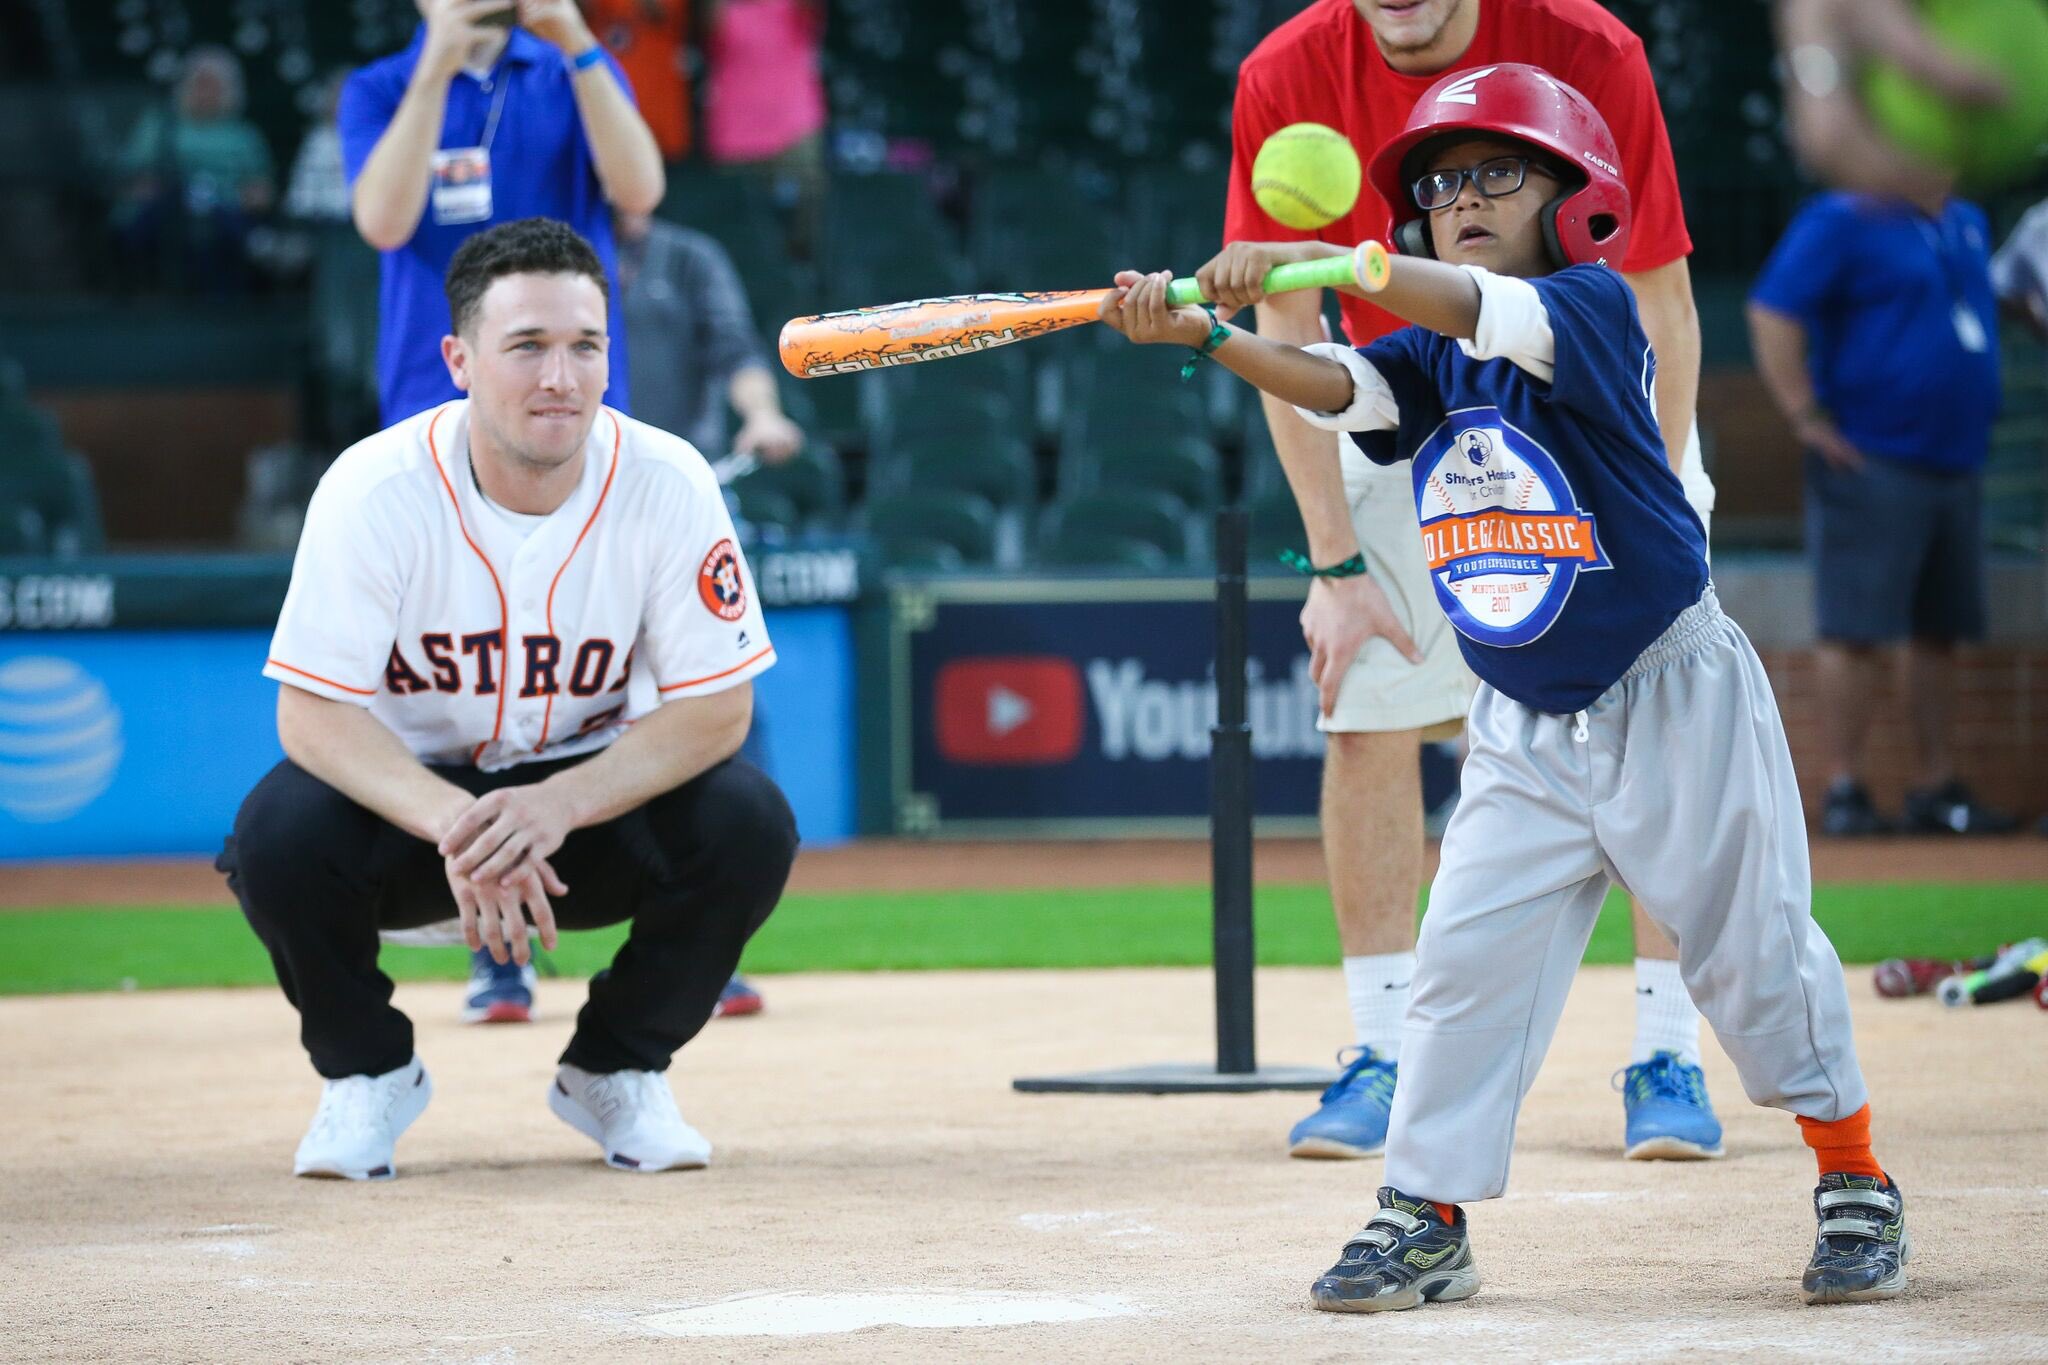 The Astros Experience in Houston